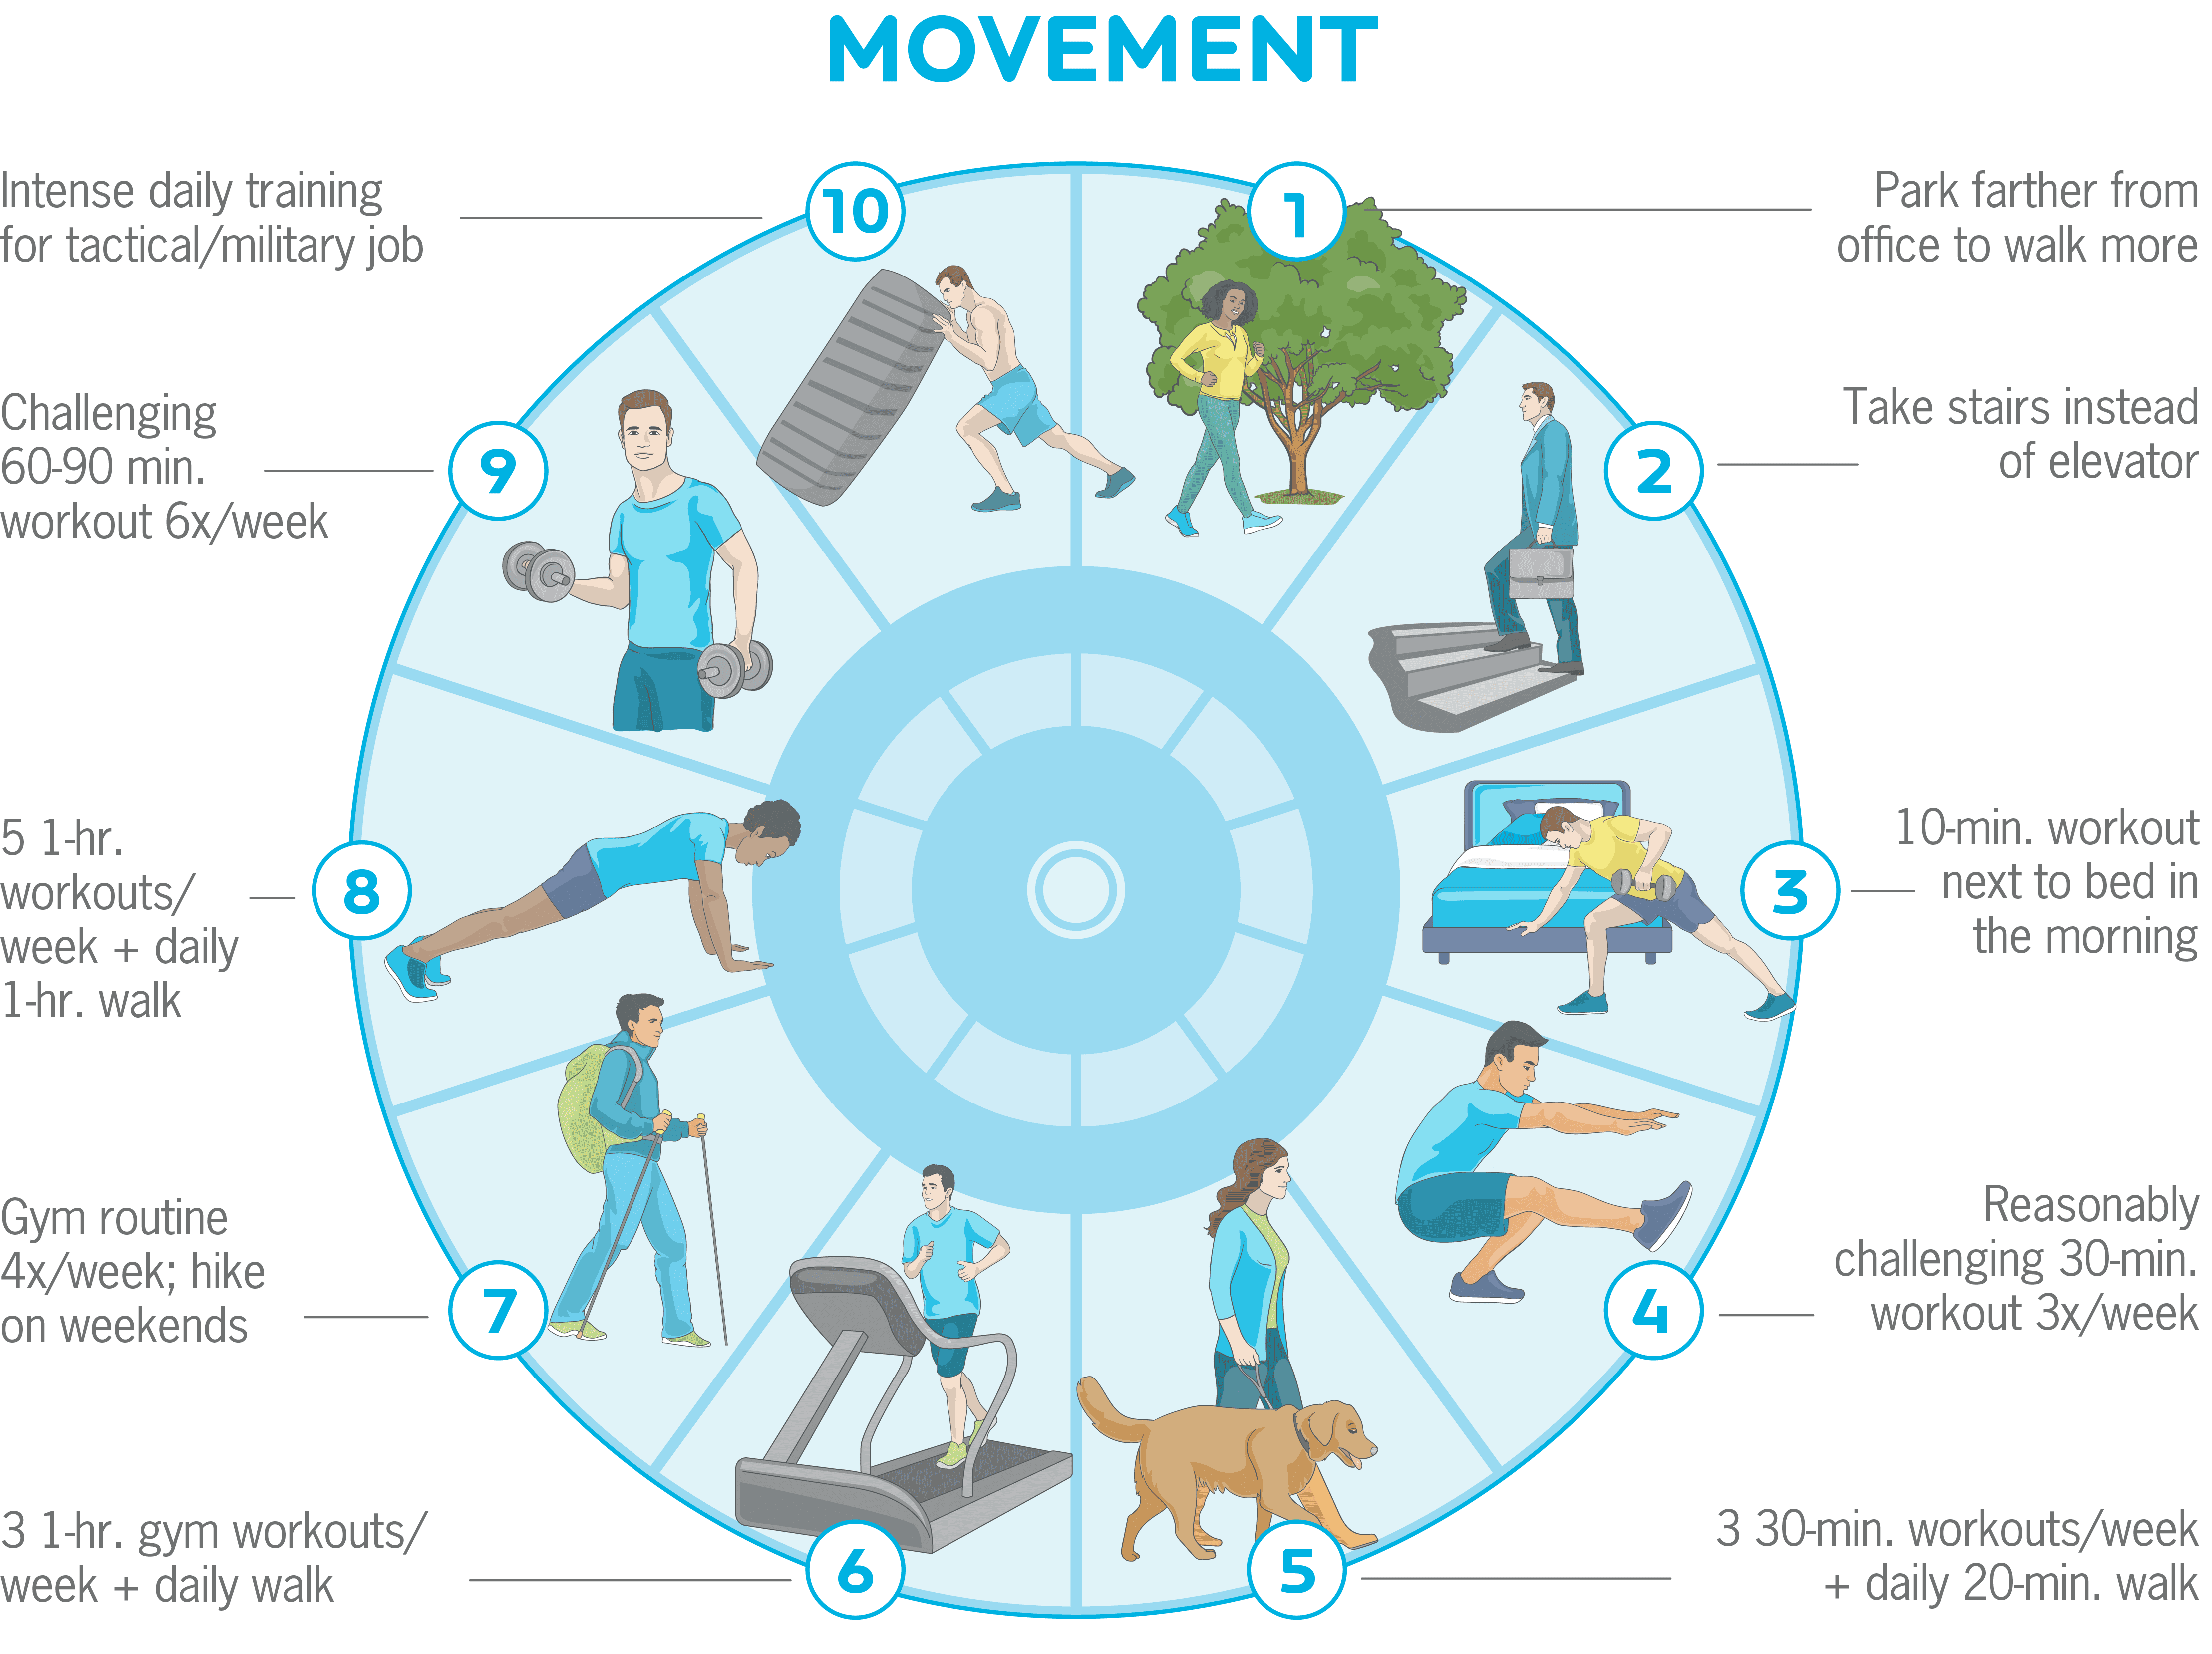 Dial shows movement options from a scale of one to ten. For example, one suggests parking remoter yonder to walk more; five suggests doing three thirty minutes workouts a week, plus two twenty minute sessions of walking; and ten suggests doing intense daily military-style training.